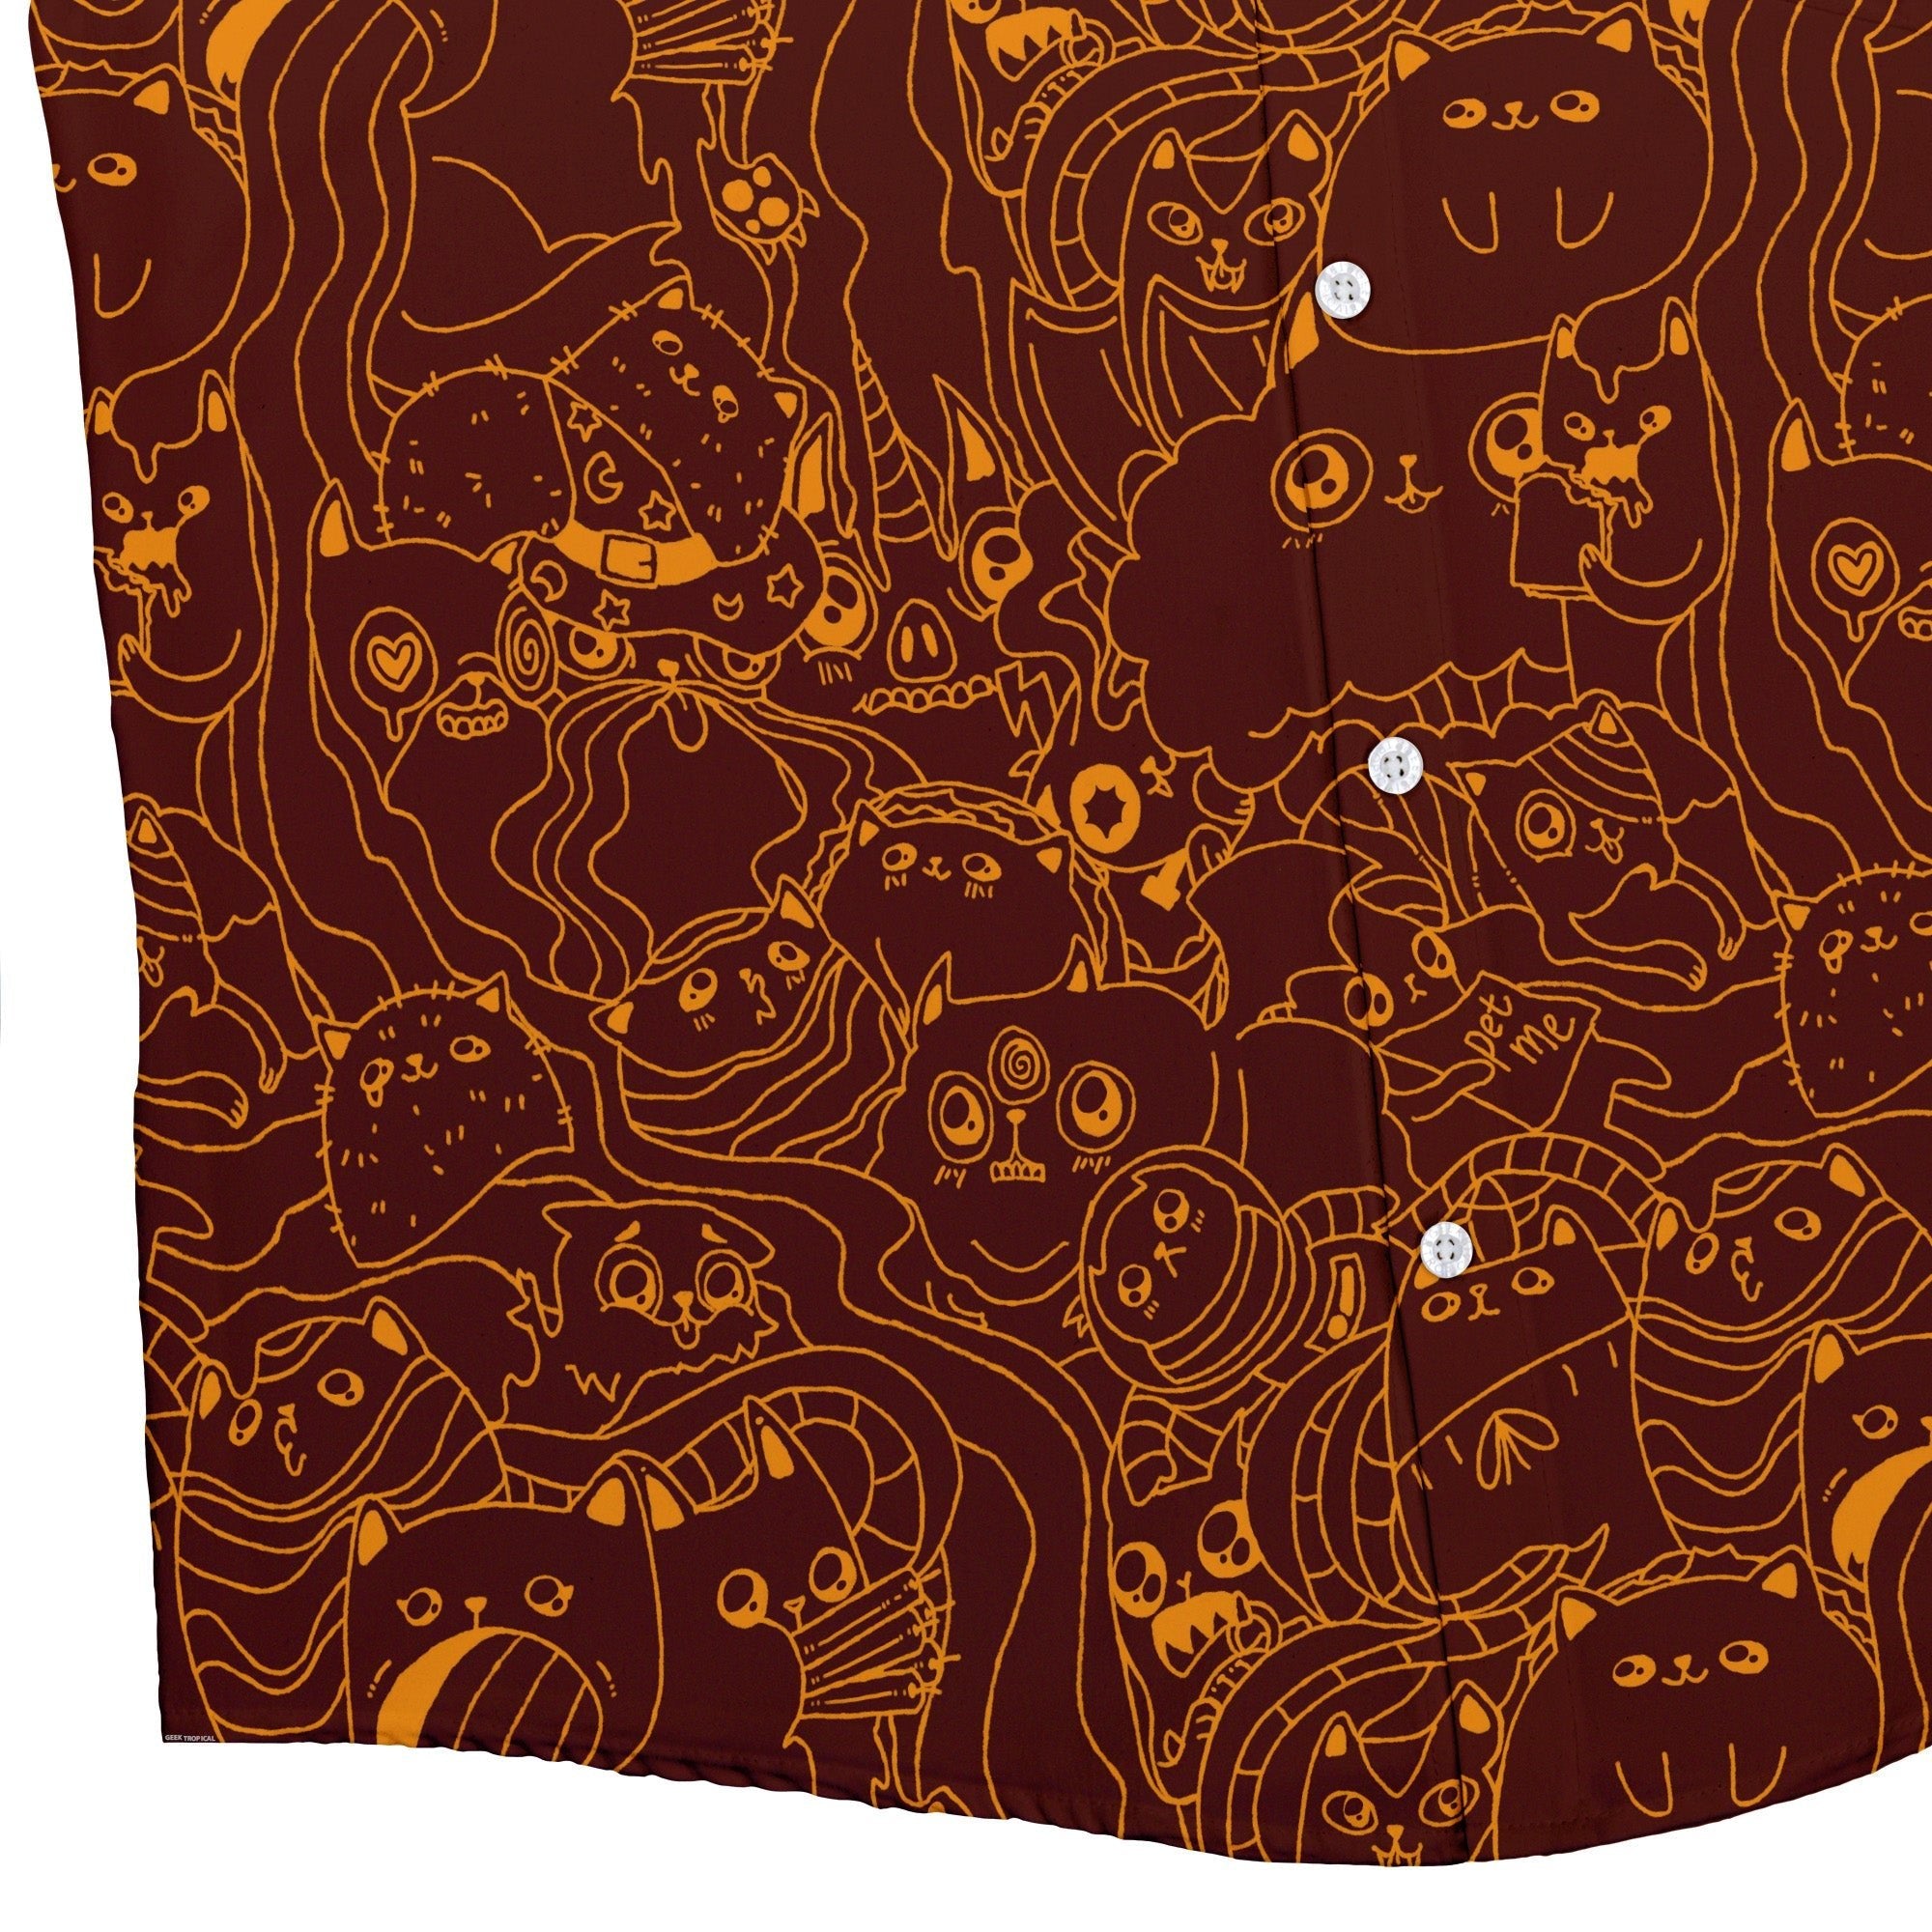 Exploding Kittens Mashup Red Brown Button Up Shirt - adult sizing - Animal Patterns - board game print